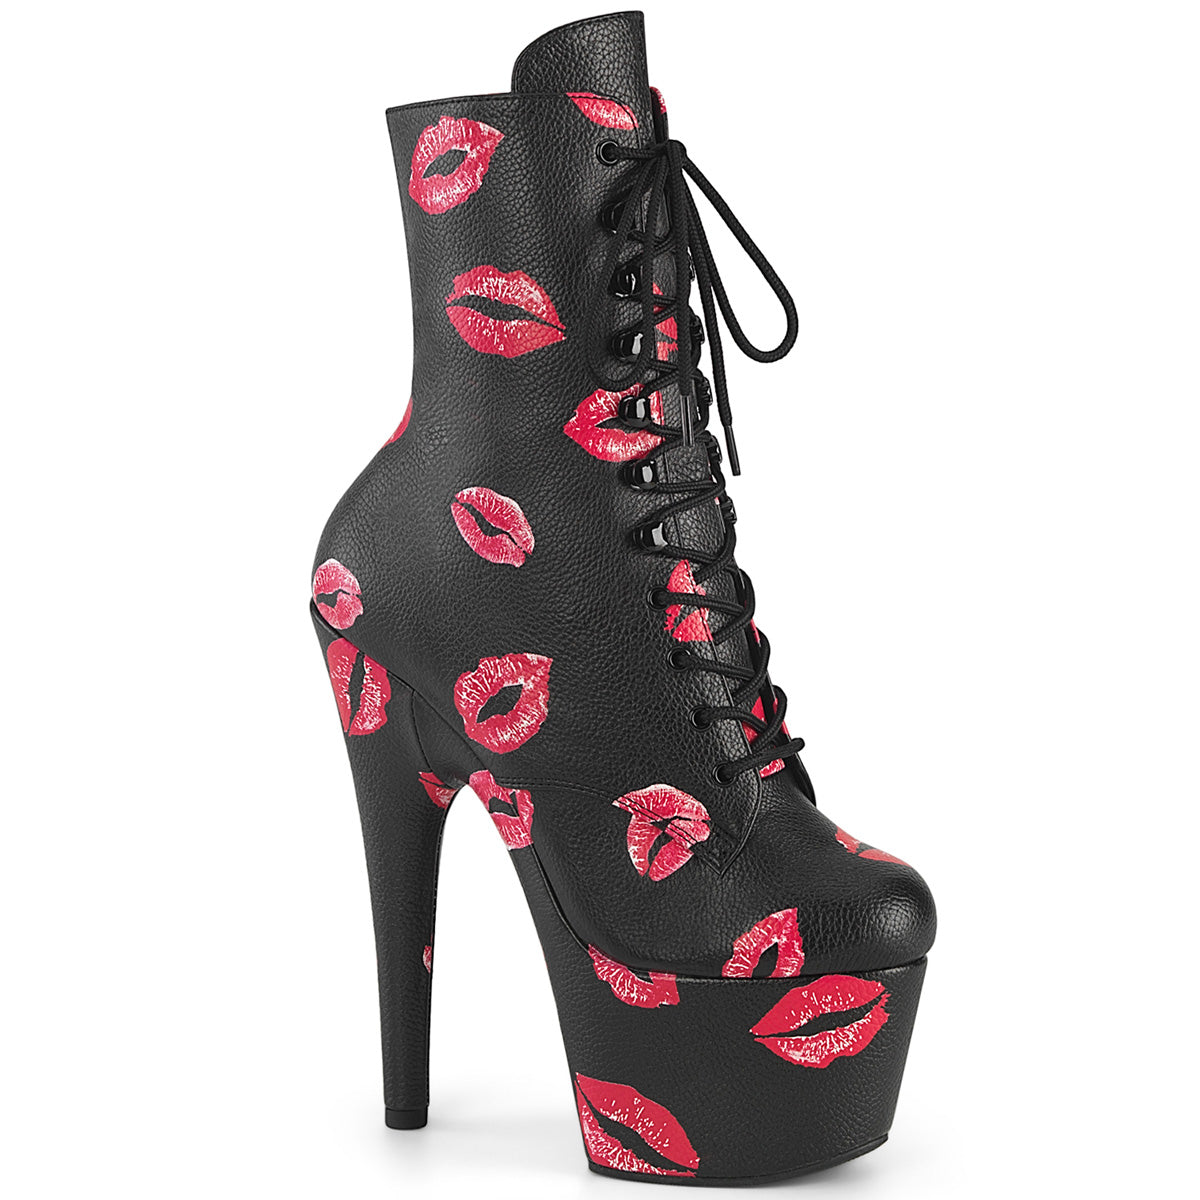 ADORE-1020KISSES Lace-Up Lips Print Ankle Boot Black Multi view 1